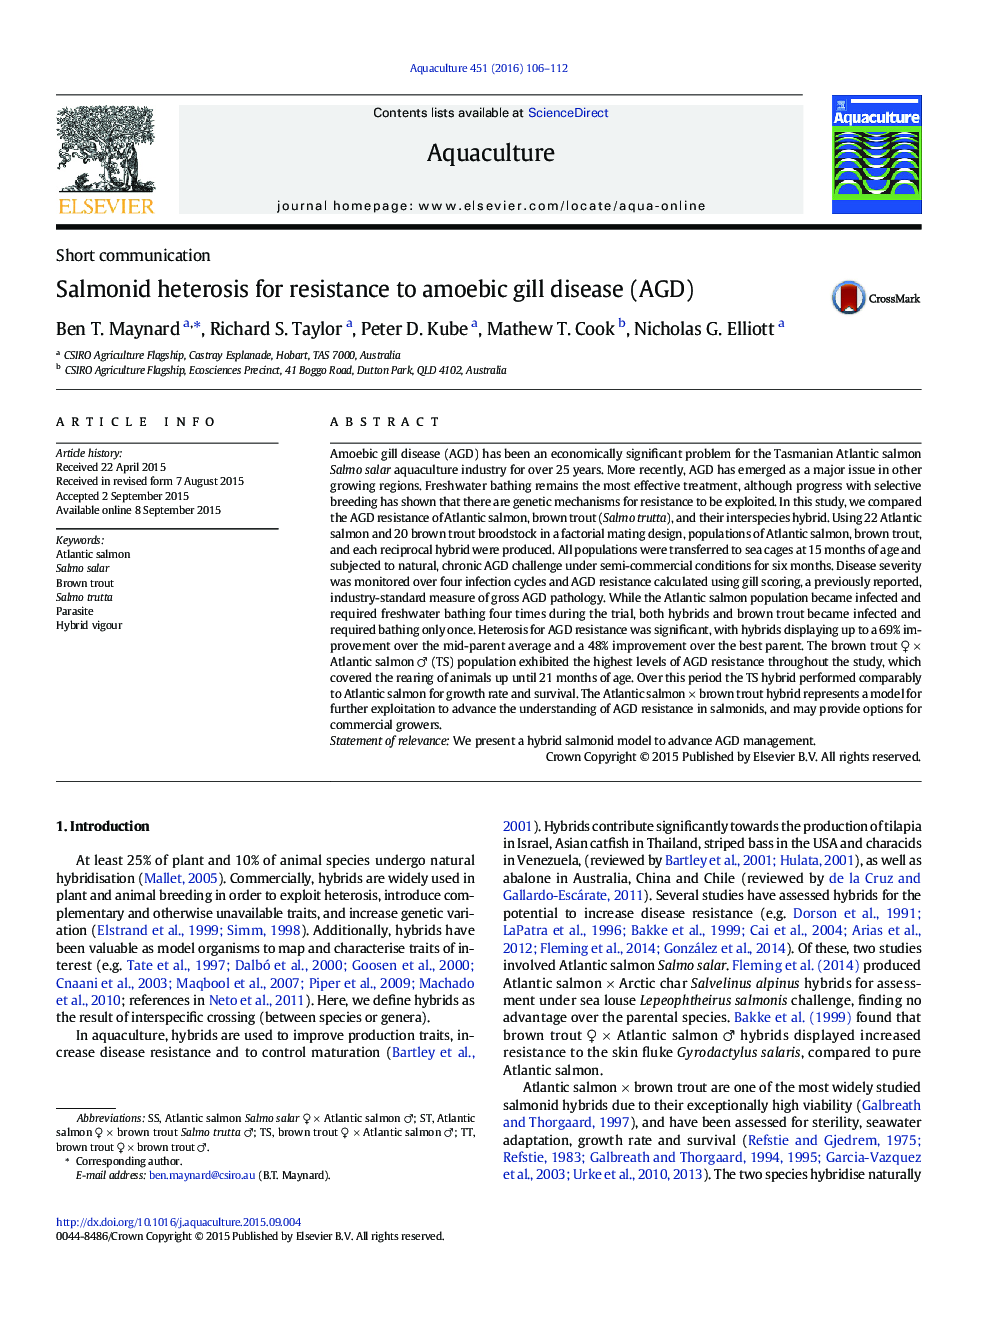 Salmonid heterosis for resistance to amoebic gill disease (AGD)